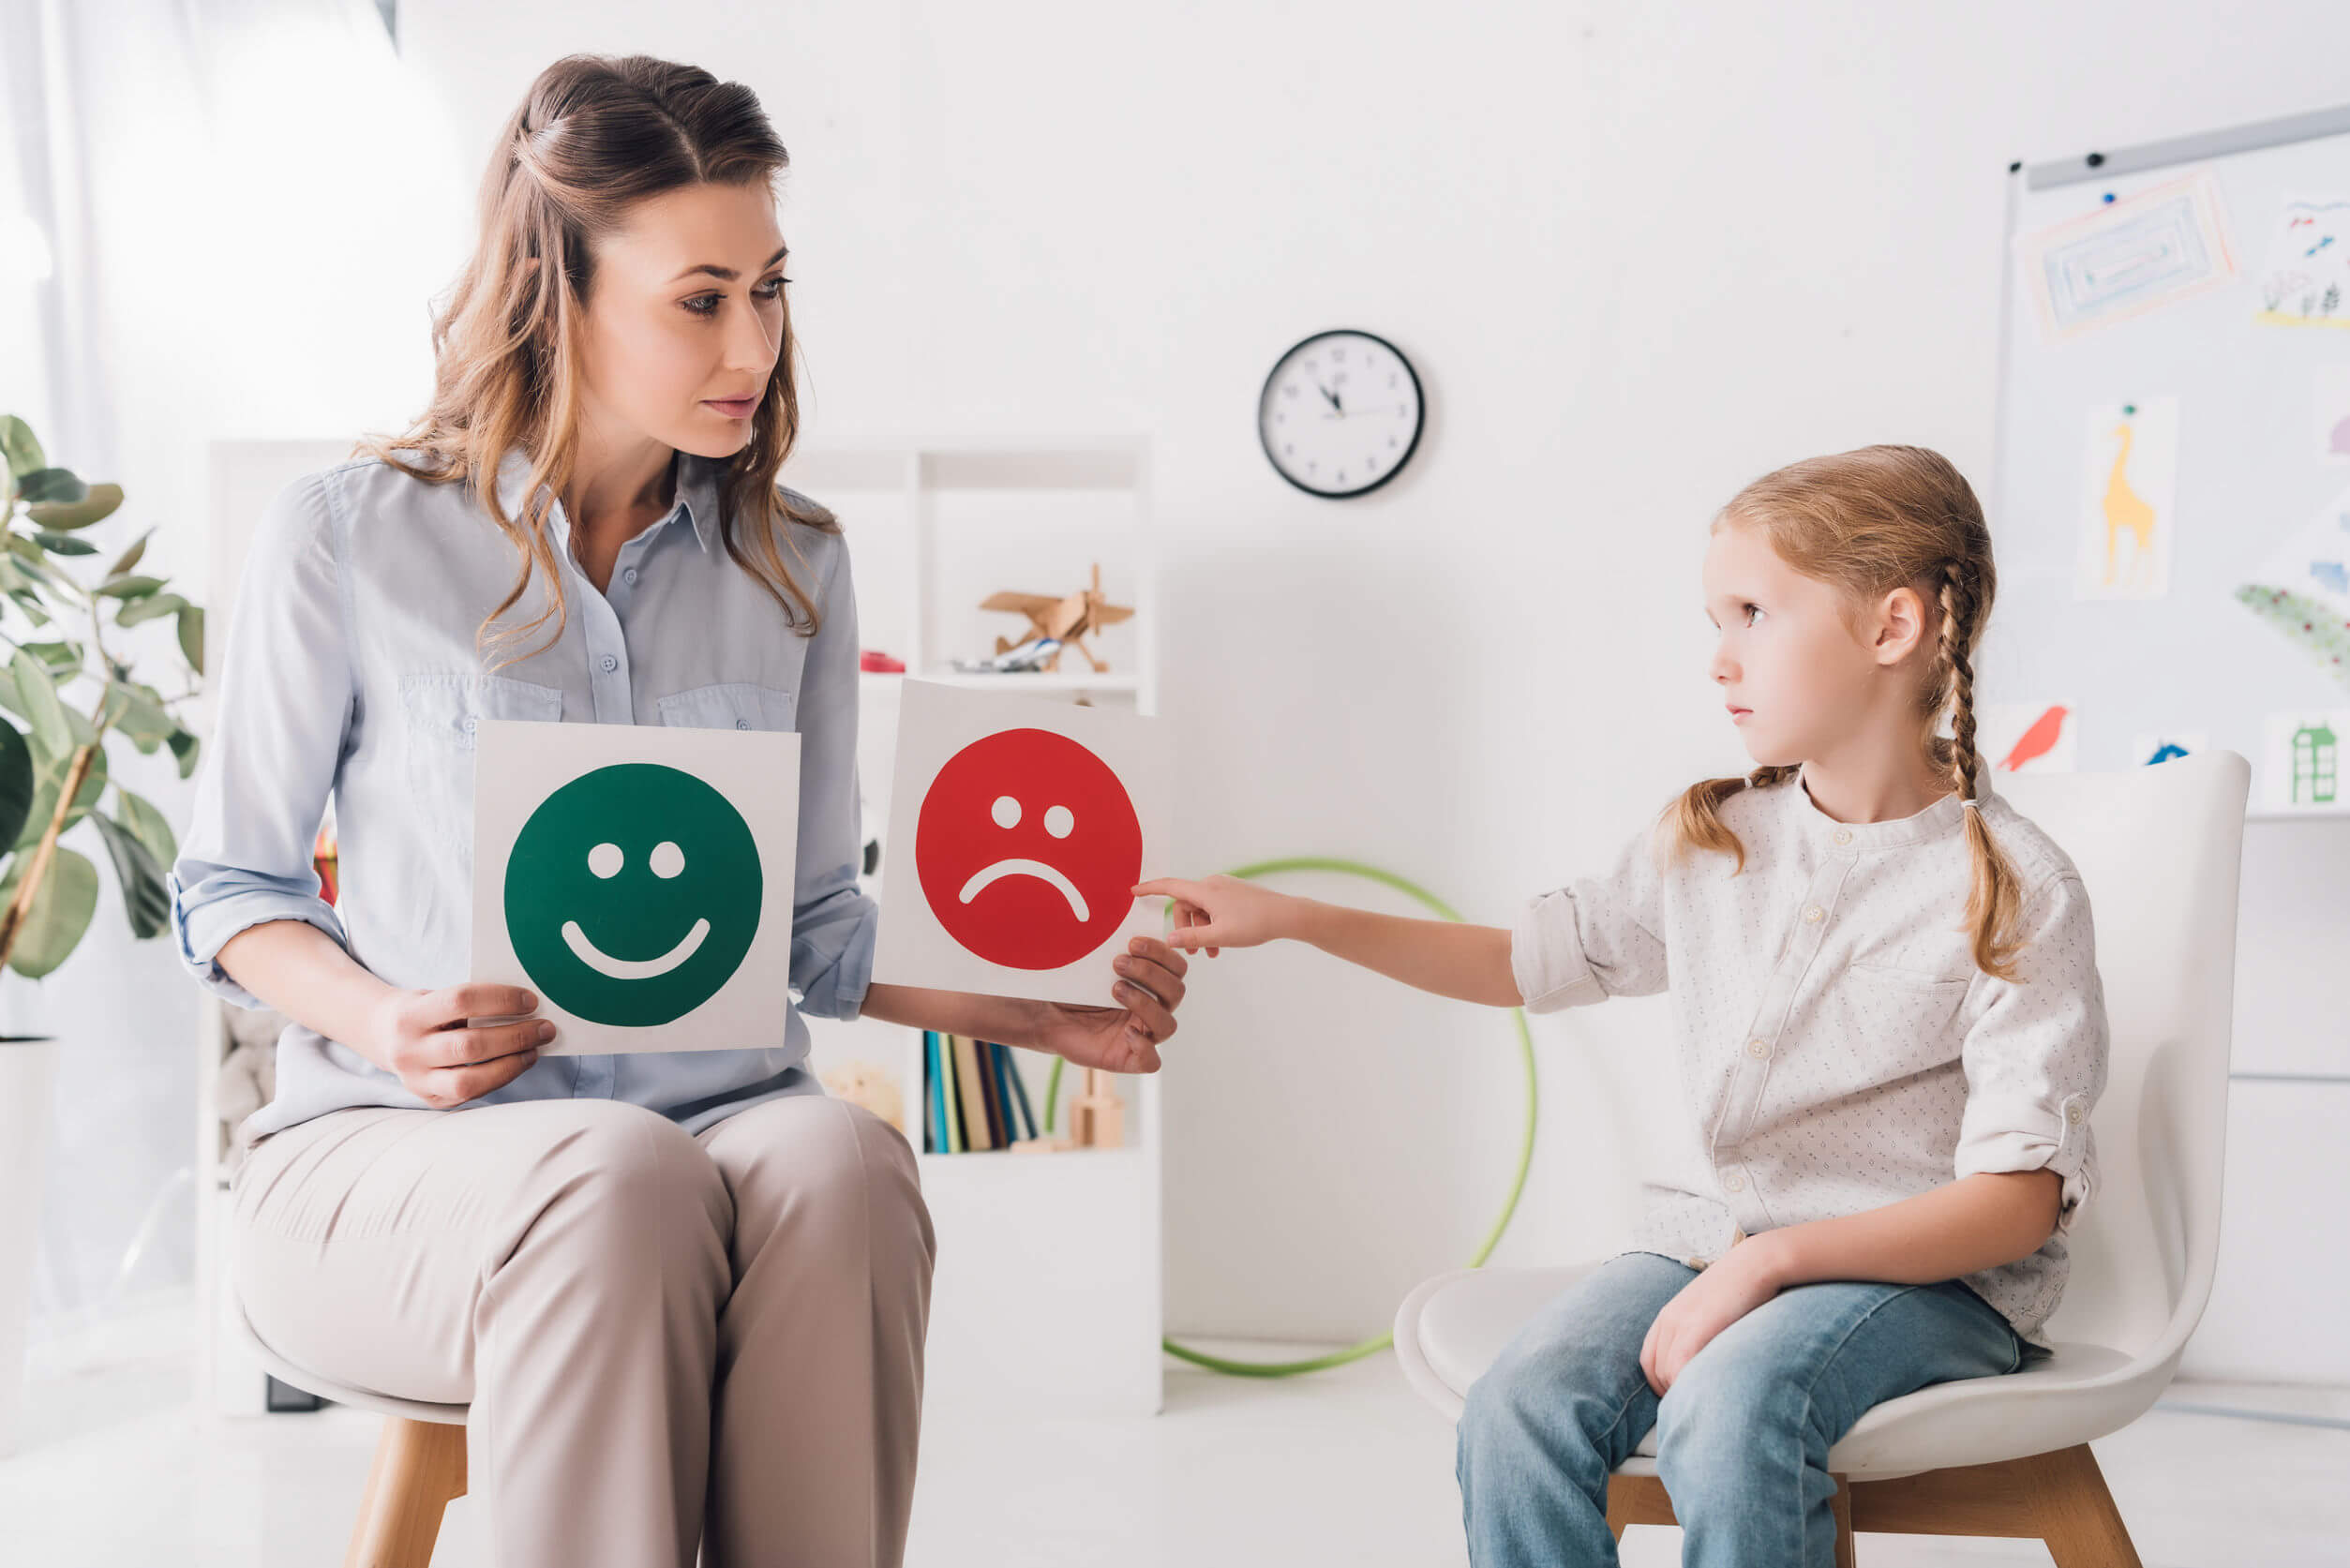 A child pointing to a sad face during a therapy session.